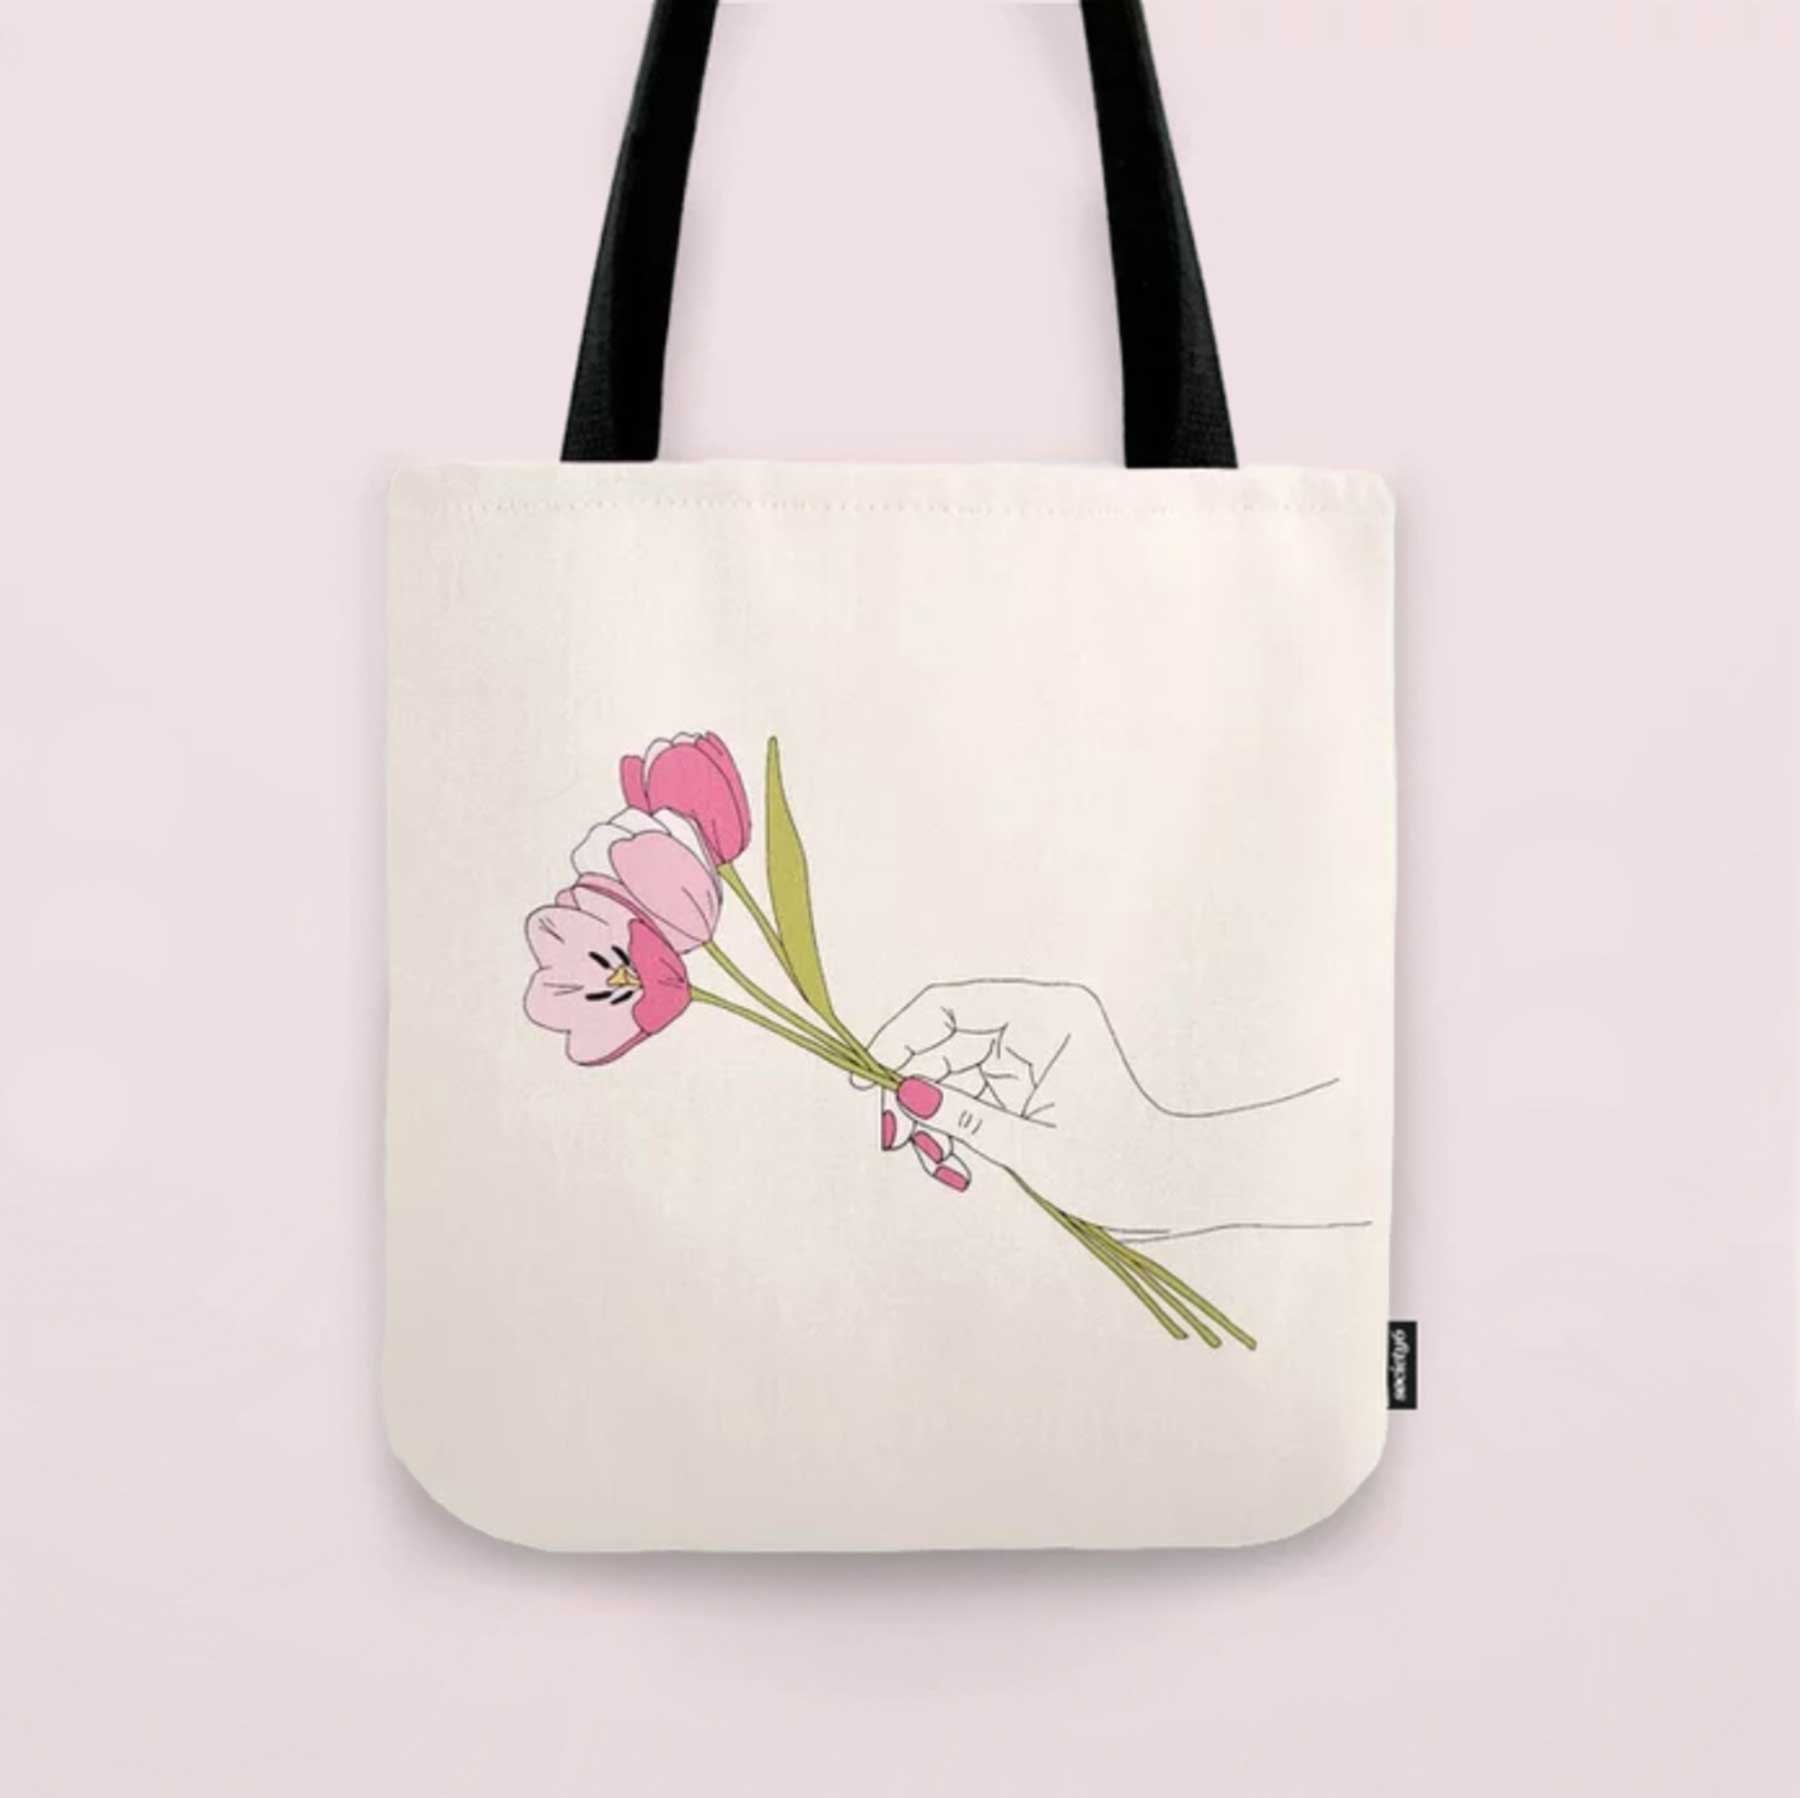 Bouquet tote bag - Make and Tell on Society6